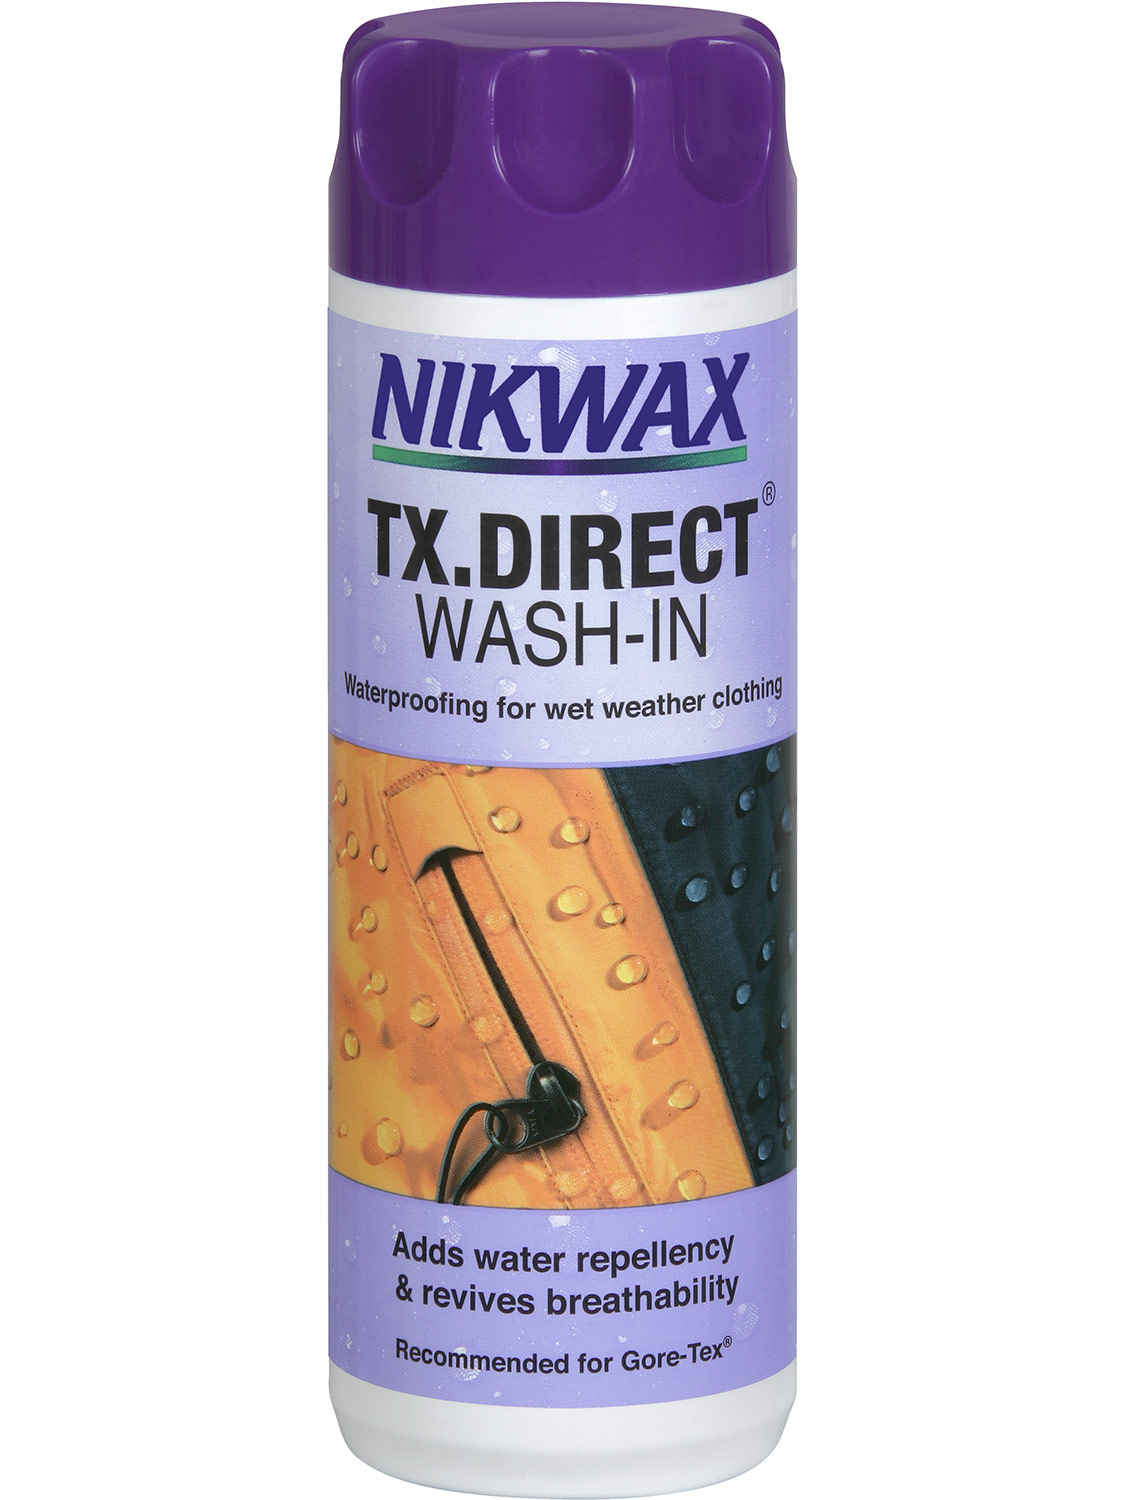 Nikwax Tx Direct Wash-in - Size: ONE